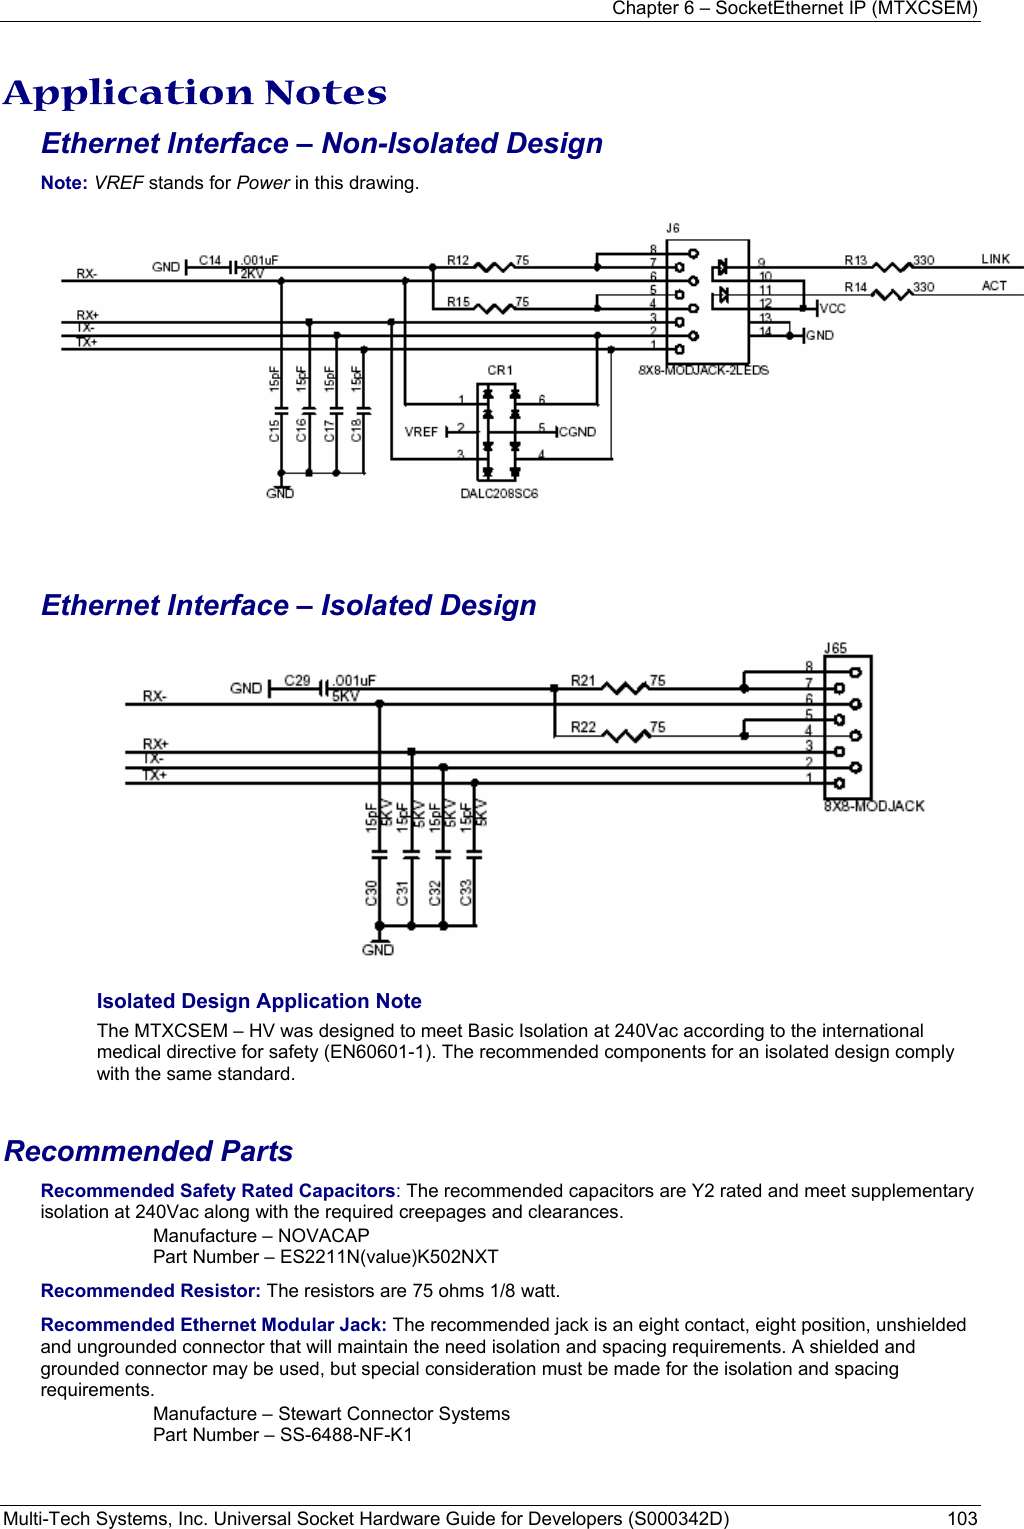 Chapter 6 – SocketEthernet IP (MTXCSEM)  Multi-Tech Systems, Inc. Universal Socket Hardware Guide for Developers (S000342D)  103  Application Notes Ethernet Interface – Non-Isolated Design Note: VREF stands for Power in this drawing.    Ethernet Interface – Isolated Design  Isolated Design Application Note The MTXCSEM – HV was designed to meet Basic Isolation at 240Vac according to the international medical directive for safety (EN60601-1). The recommended components for an isolated design comply with the same standard.    Recommended Parts Recommended Safety Rated Capacitors: The recommended capacitors are Y2 rated and meet supplementary isolation at 240Vac along with the required creepages and clearances. Manufacture – NOVACAP Part Number – ES2211N(value)K502NXT Recommended Resistor: The resistors are 75 ohms 1/8 watt. Recommended Ethernet Modular Jack: The recommended jack is an eight contact, eight position, unshielded and ungrounded connector that will maintain the need isolation and spacing requirements. A shielded and grounded connector may be used, but special consideration must be made for the isolation and spacing requirements.  Manufacture – Stewart Connector Systems Part Number – SS-6488-NF-K1    